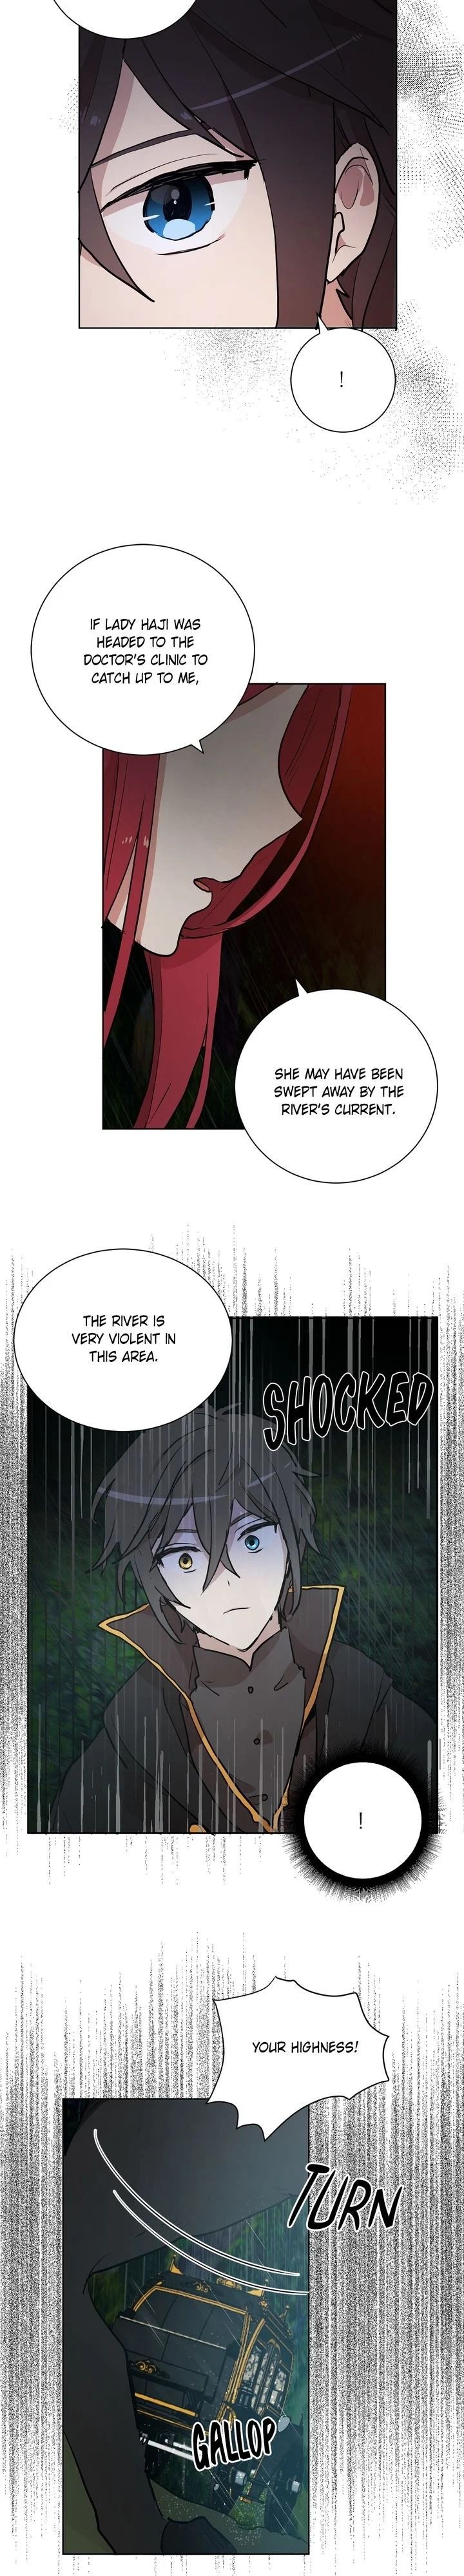 Cat's Bride Chapter 56 page 3